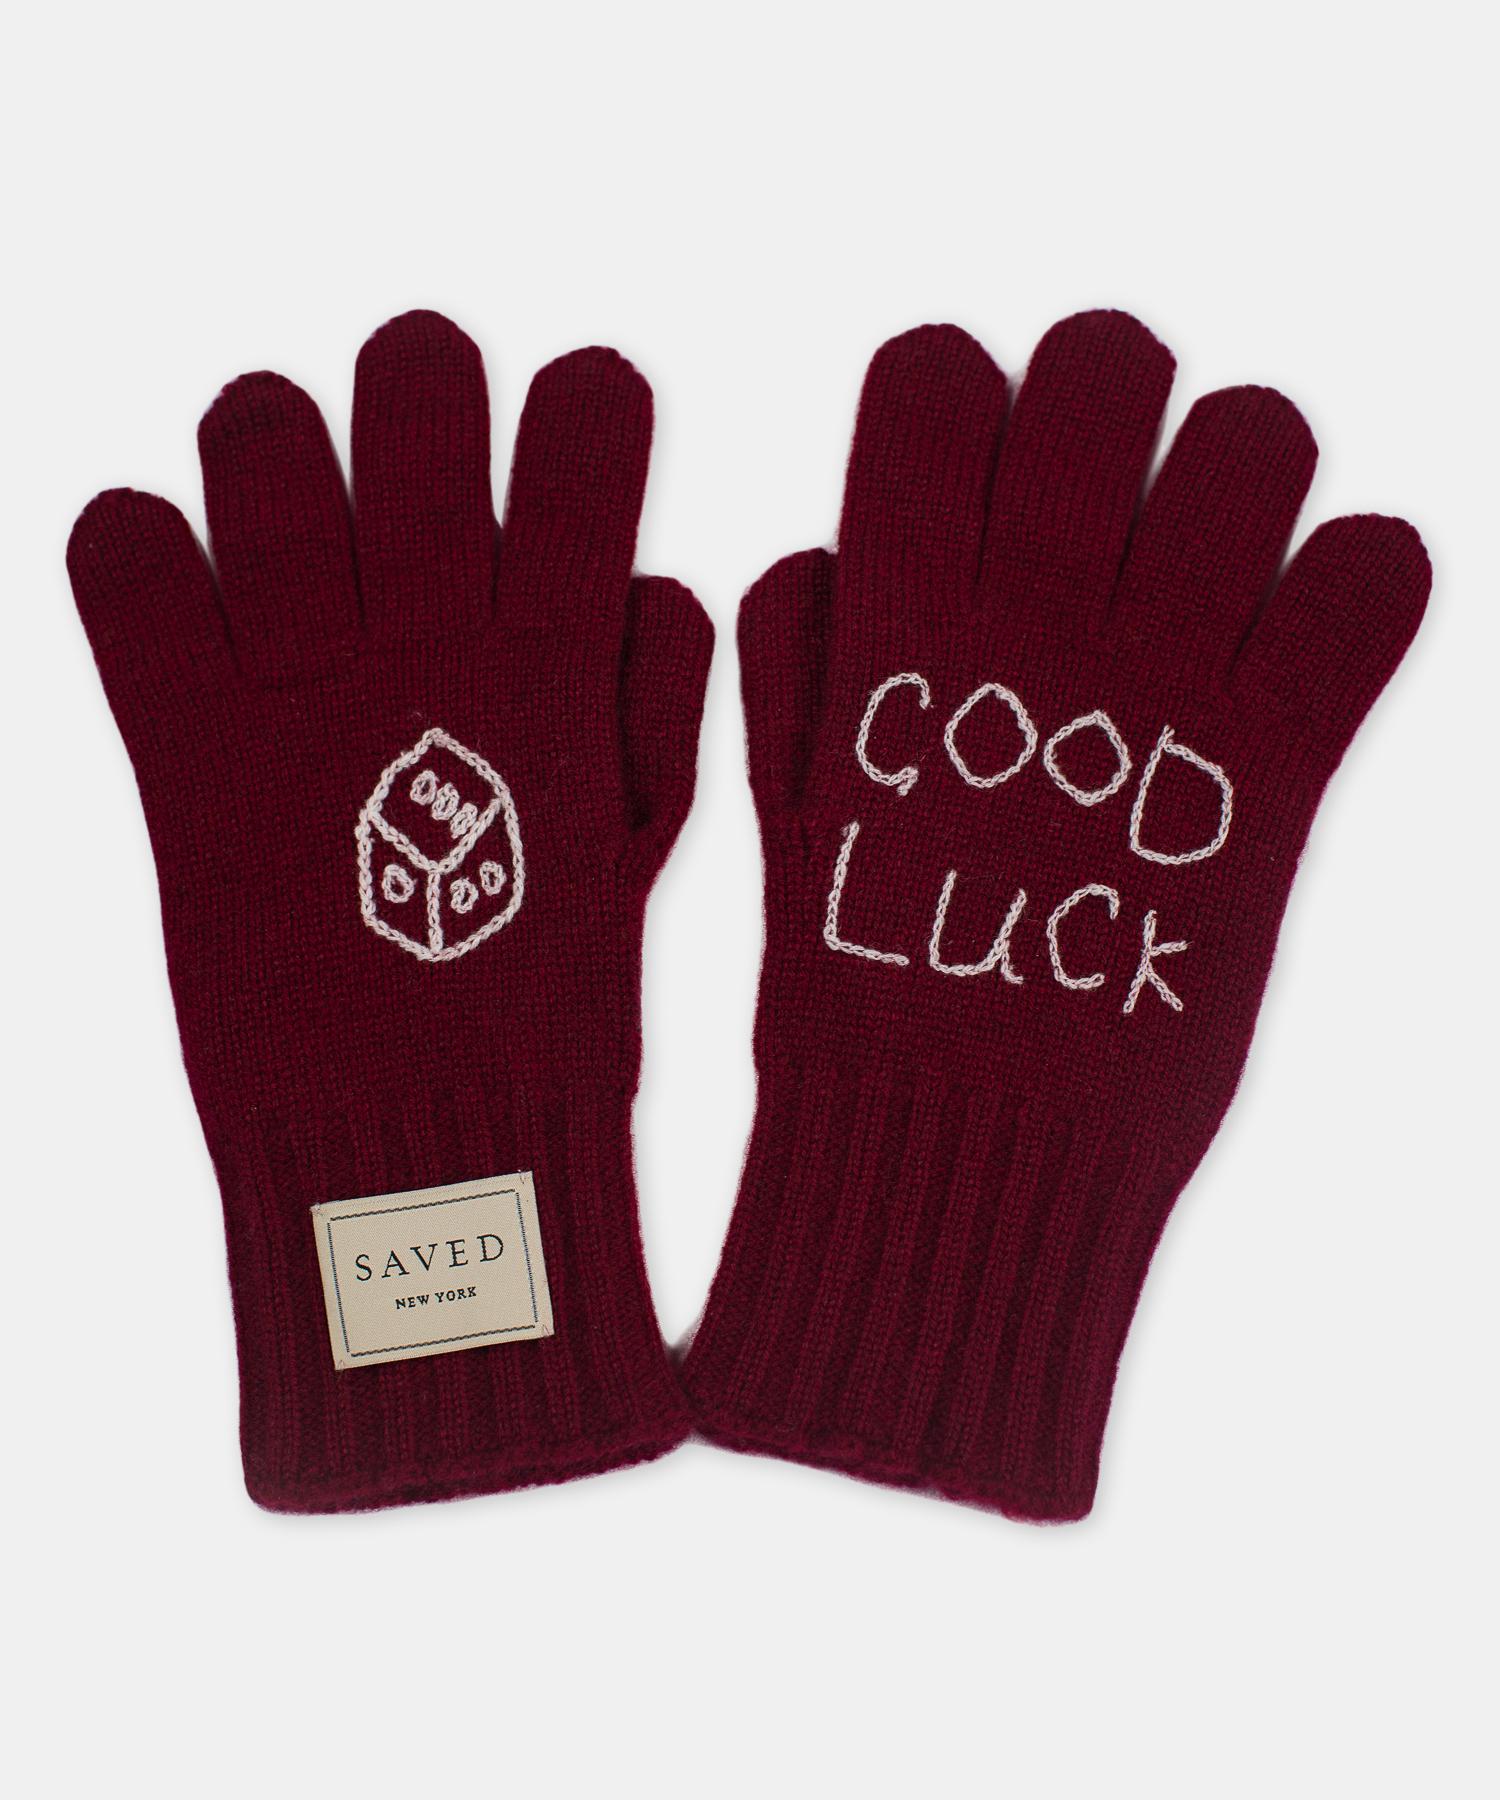 Good Luck Cashmere gloves by Saved, New York.

100% Cashmere. Includes contrasting hand embroidery details. One size.